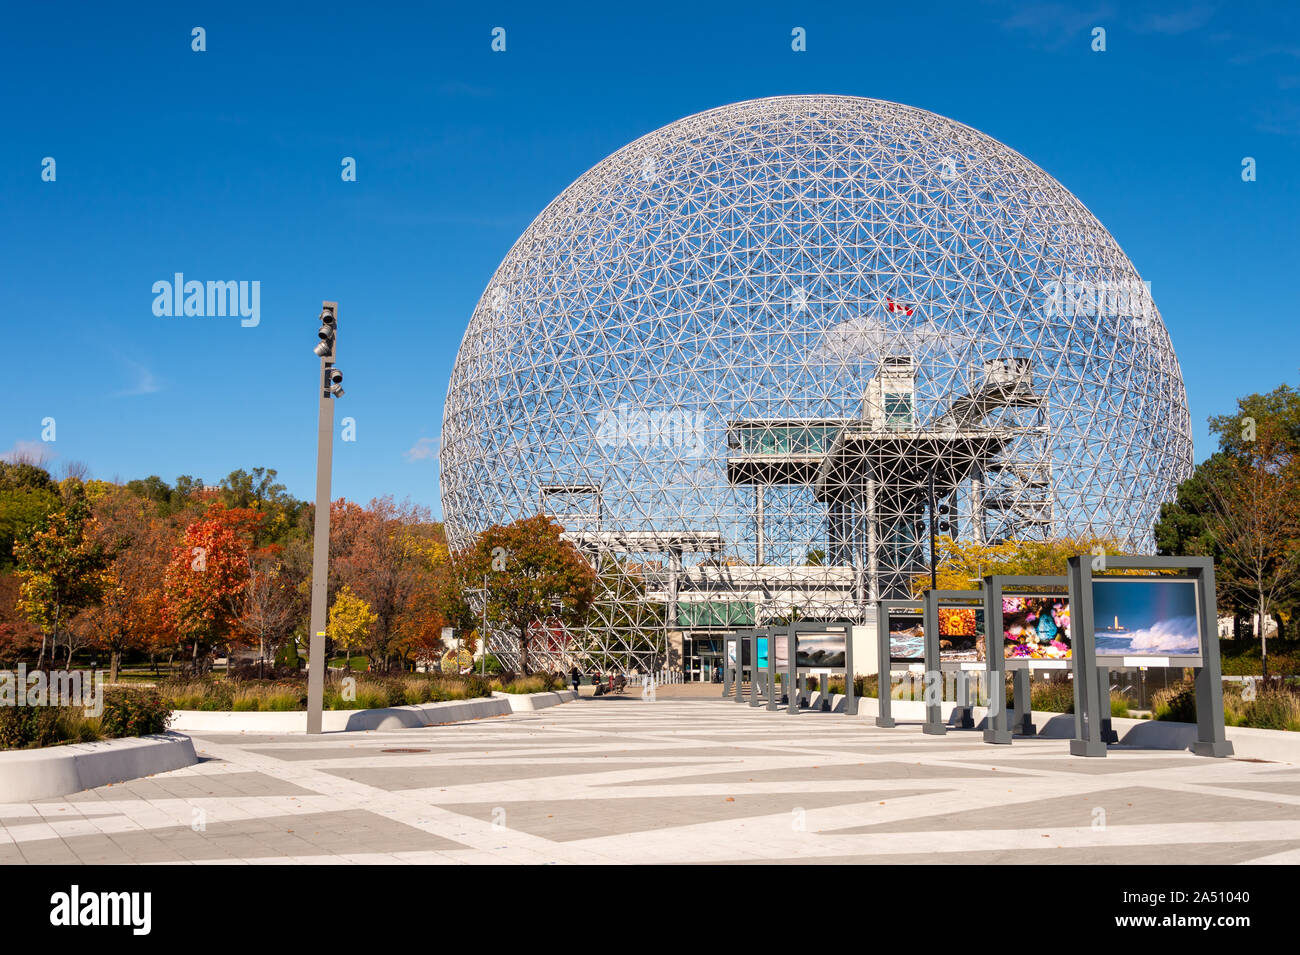 Montreal, Canada - 15 October 2019: Biosphere and Parc Jean Drapeau in the Autumn season Stock Photo